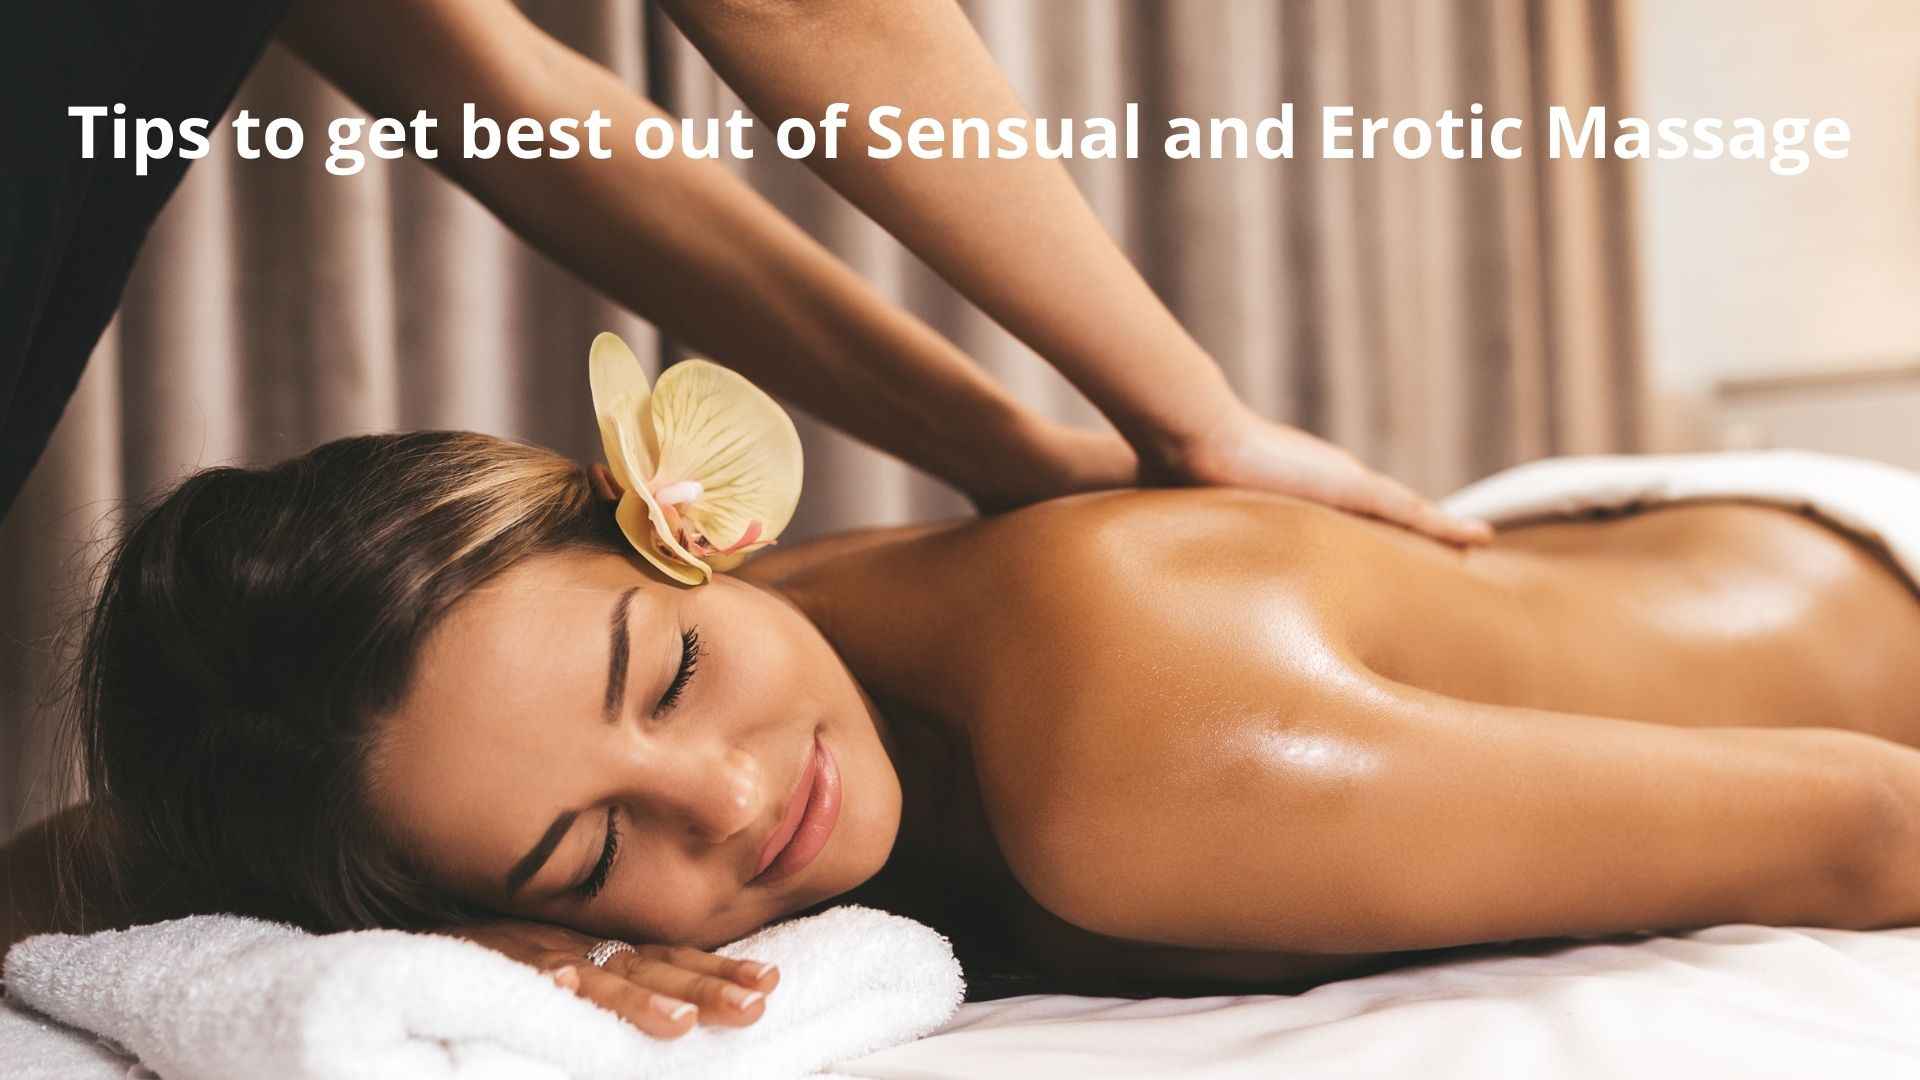 Tips to get best out of Sensual and Erotic Massage